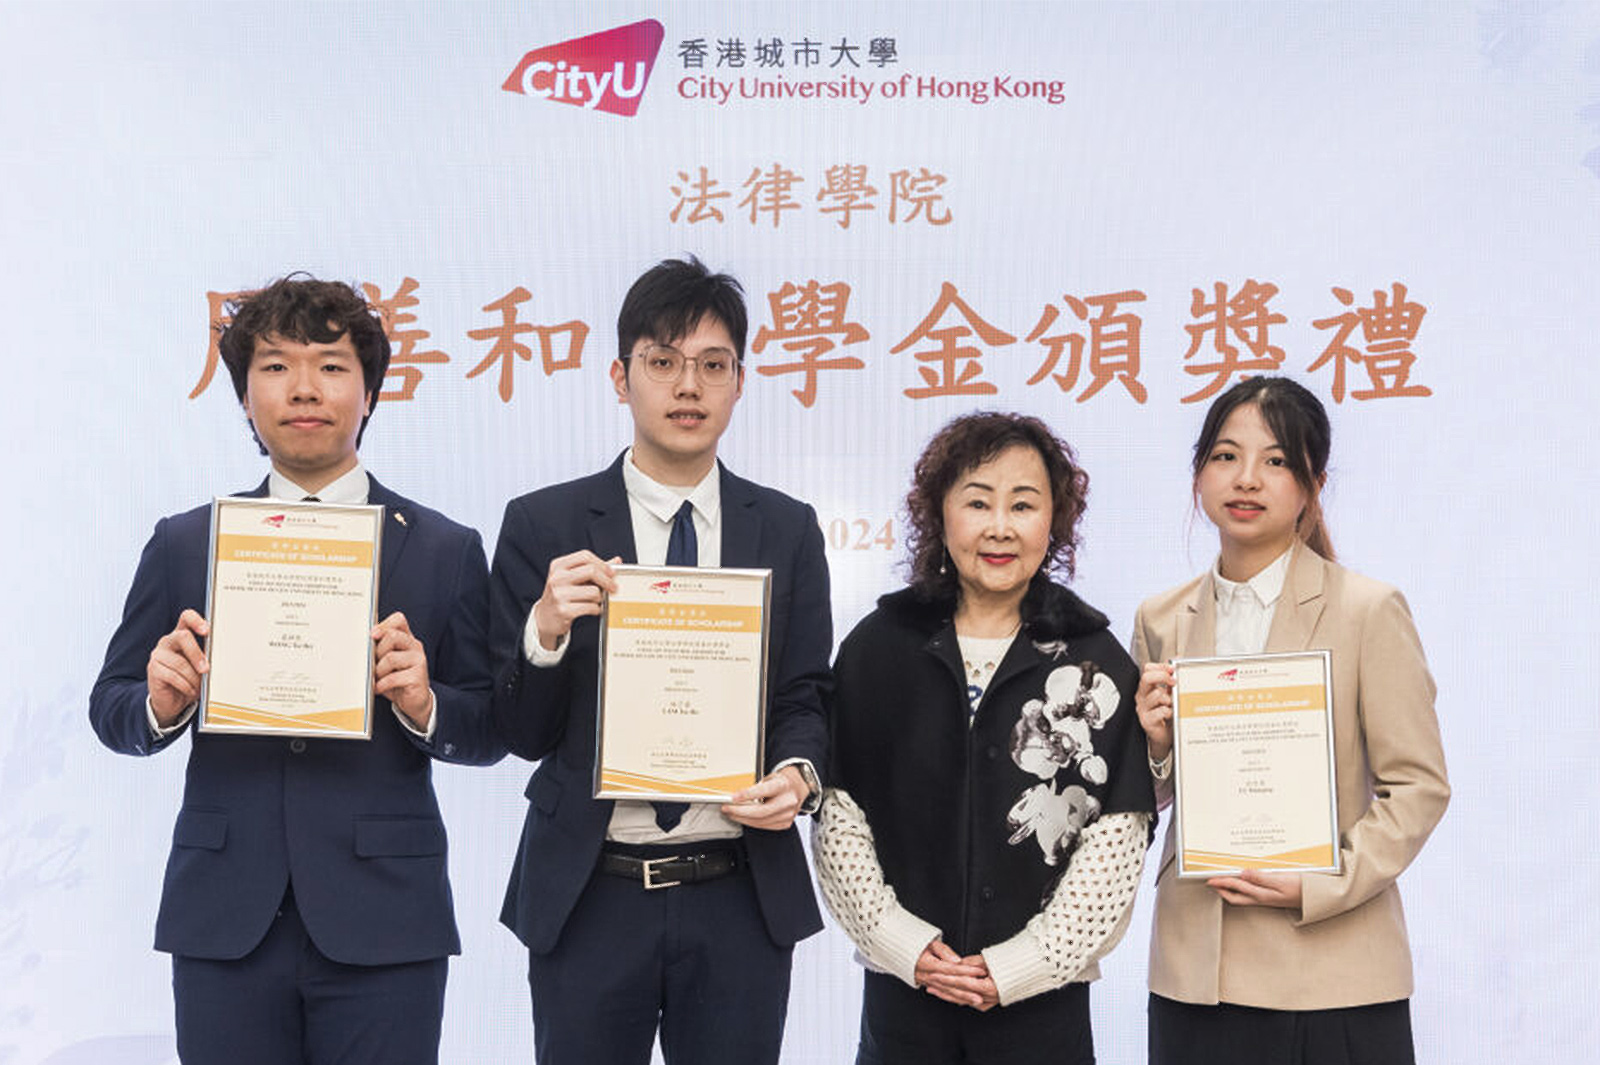 Three undergraduates in the School of Law are awarded the Chau Sin Wo Scholarship this year: (from left) Wong Tsz-hei, Lam Tsz-ho and Yu Hanqing (1st right).